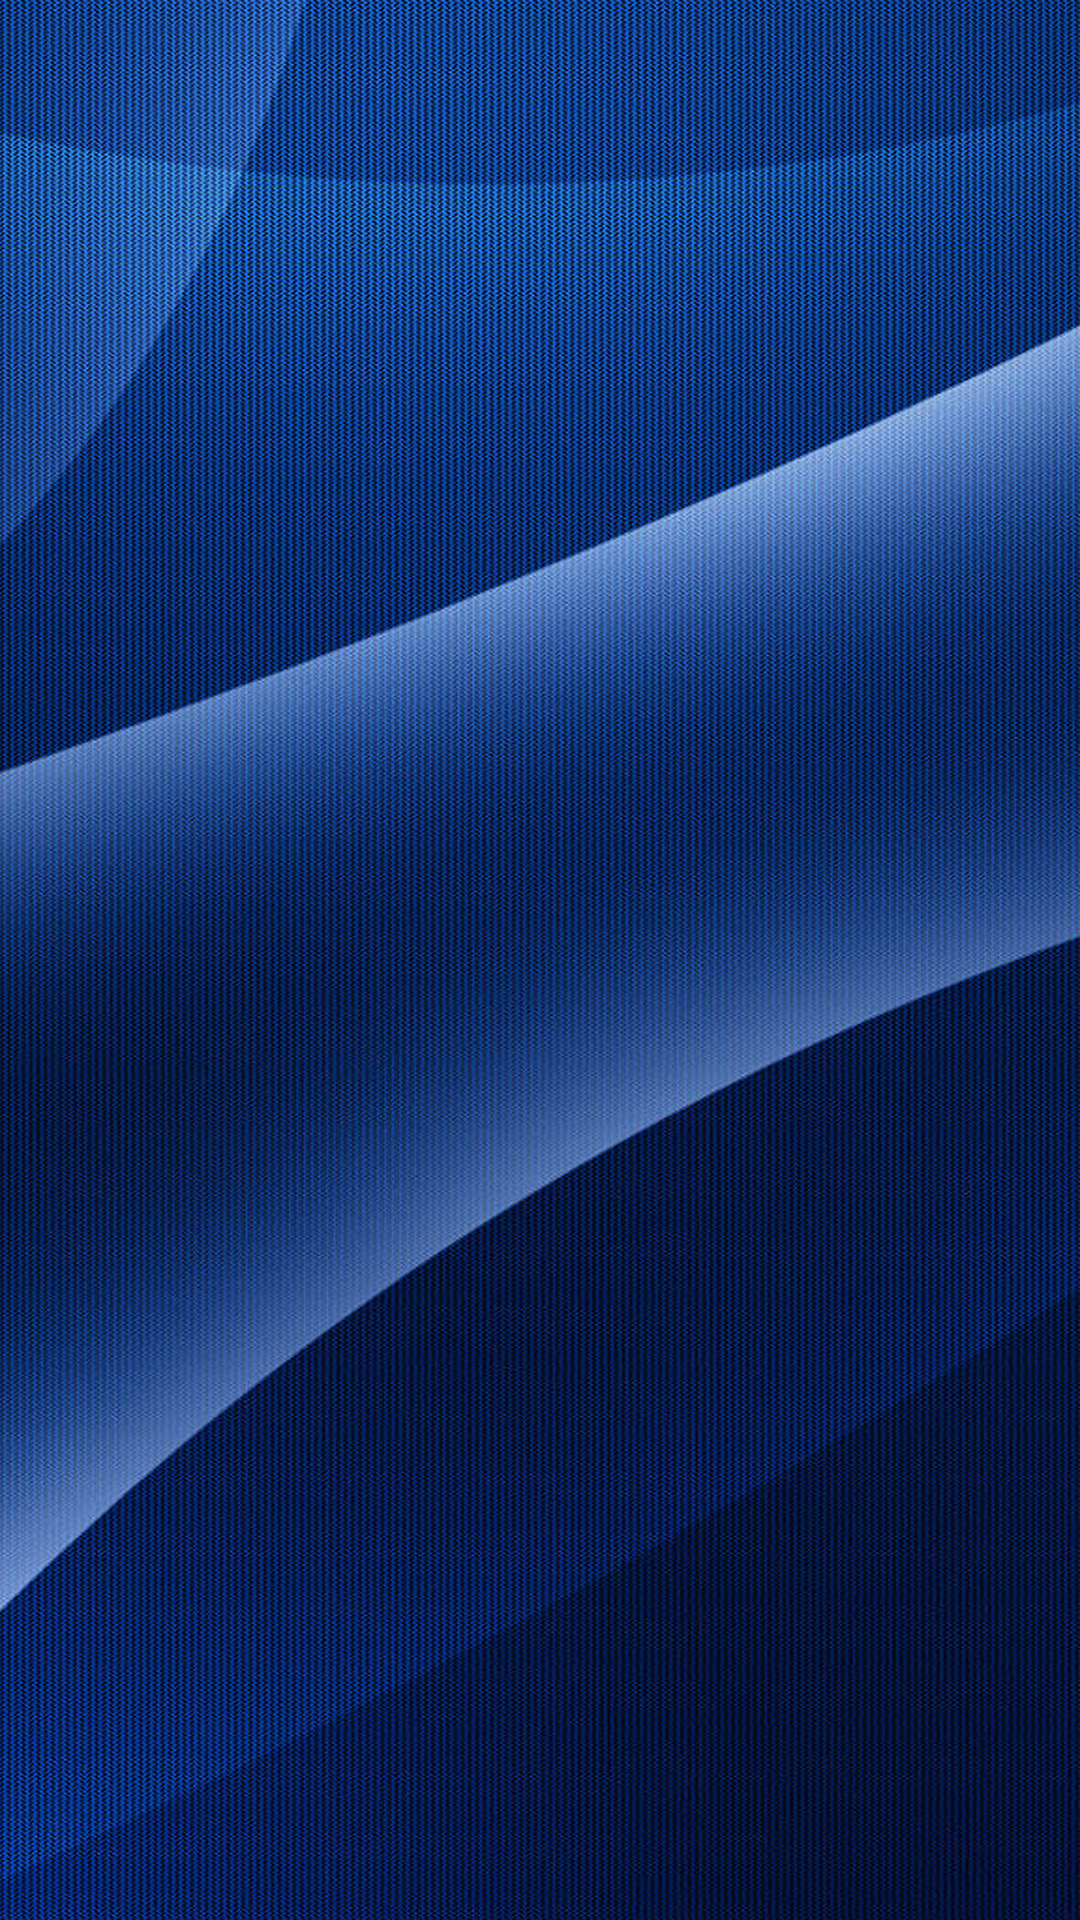  fabric Samsung Galaxy S5 Wallpapers Samsung Galaxy S5 Wallpapers 1080x1920